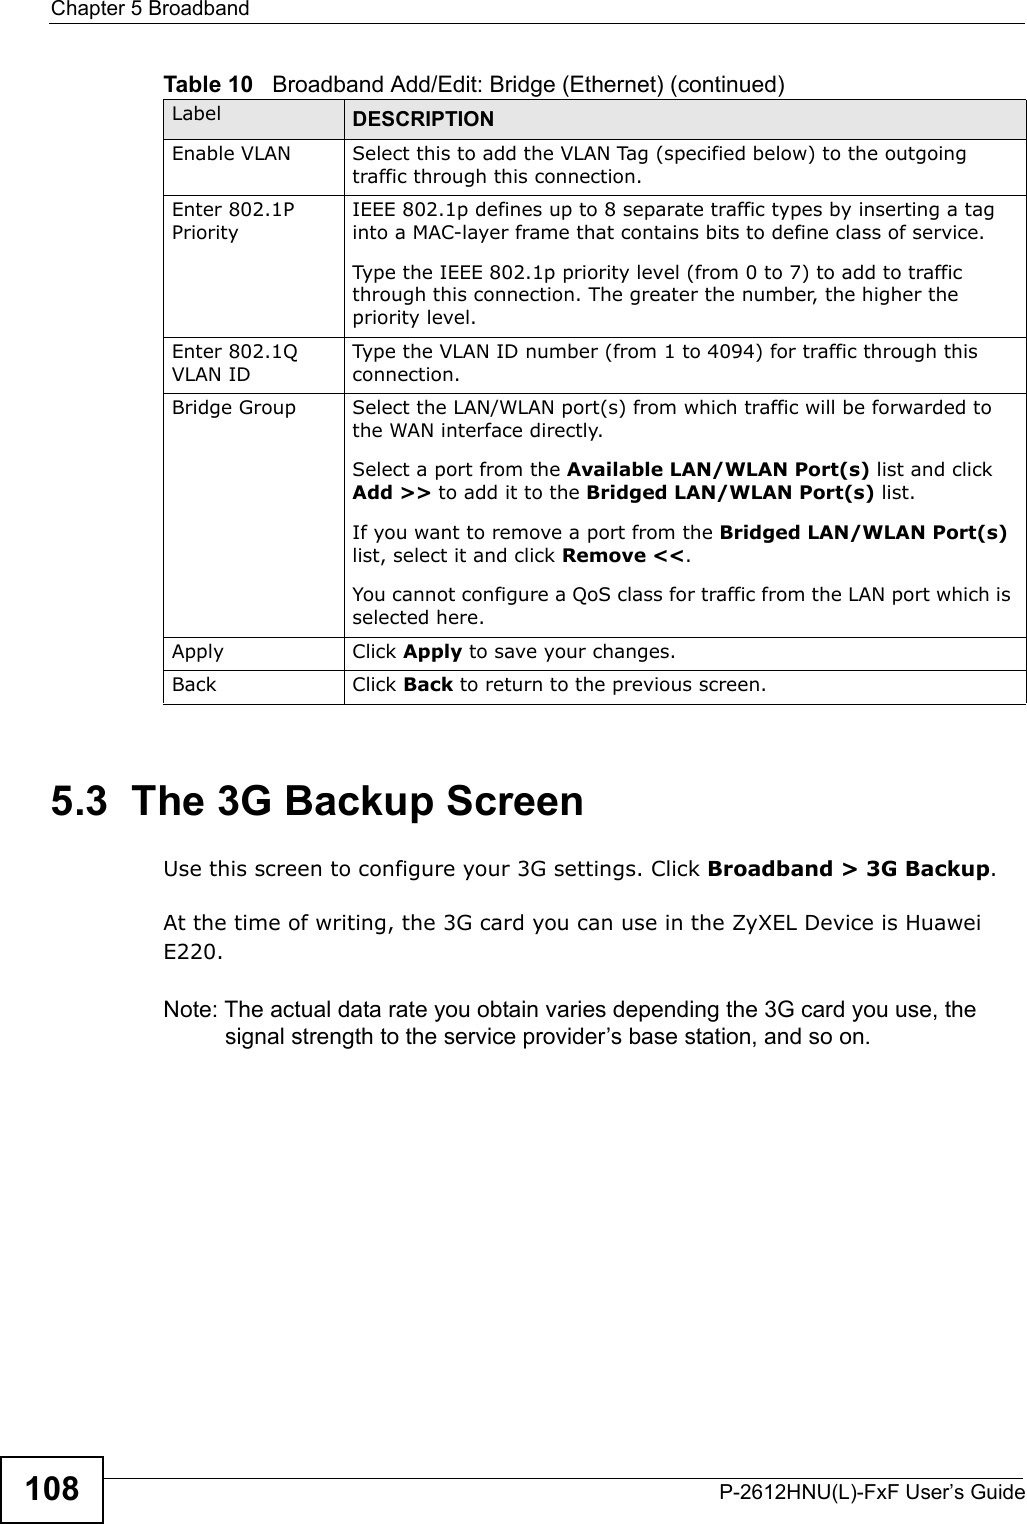 Chapter 5 BroadbandP-2612HNU(L)-FxF User’s Guide1085.3  The 3G Backup ScreenUse this screen to configure your 3G settings. Click Broadband &gt; 3G Backup.At the time of writing, the 3G card you can use in the ZyXEL Device is HuaweiE220.Note: The actual data rate you obtain varies depending the 3G card you use, the signal strength to the service provider’s base station, and so on.Enable VLAN Select this to add the VLAN Tag (specified below) to the outgoing traffic through this connection.Enter 802.1PPriorityIEEE 802.1p defines up to 8 separate traffic types by inserting a tag into a MAC-layer frame that contains bits to define class of service. Type the IEEE 802.1p priority level (from 0 to 7) to add to traffic through this connection. The greater the number, the higher the priority level.Enter 802.1QVLAN IDType the VLAN ID number (from 1 to 4094) for traffic through thisconnection.Bridge Group Select the LAN/WLAN port(s) from which traffic will be forwarded to the WAN interface directly. Select a port from the Available LAN/WLAN Port(s) list and click Add &gt;&gt; to add it to the Bridged LAN/WLAN Port(s) list. If you want to remove a port from the Bridged LAN/WLAN Port(s)list, select it and click Remove &lt;&lt;.You cannot configure a QoS class for traffic from the LAN port which is selected here.Apply Click Apply to save your changes.Back Click Back to return to the previous screen.Table 10   Broadband Add/Edit: Bridge (Ethernet) (continued)Label DESCRIPTION